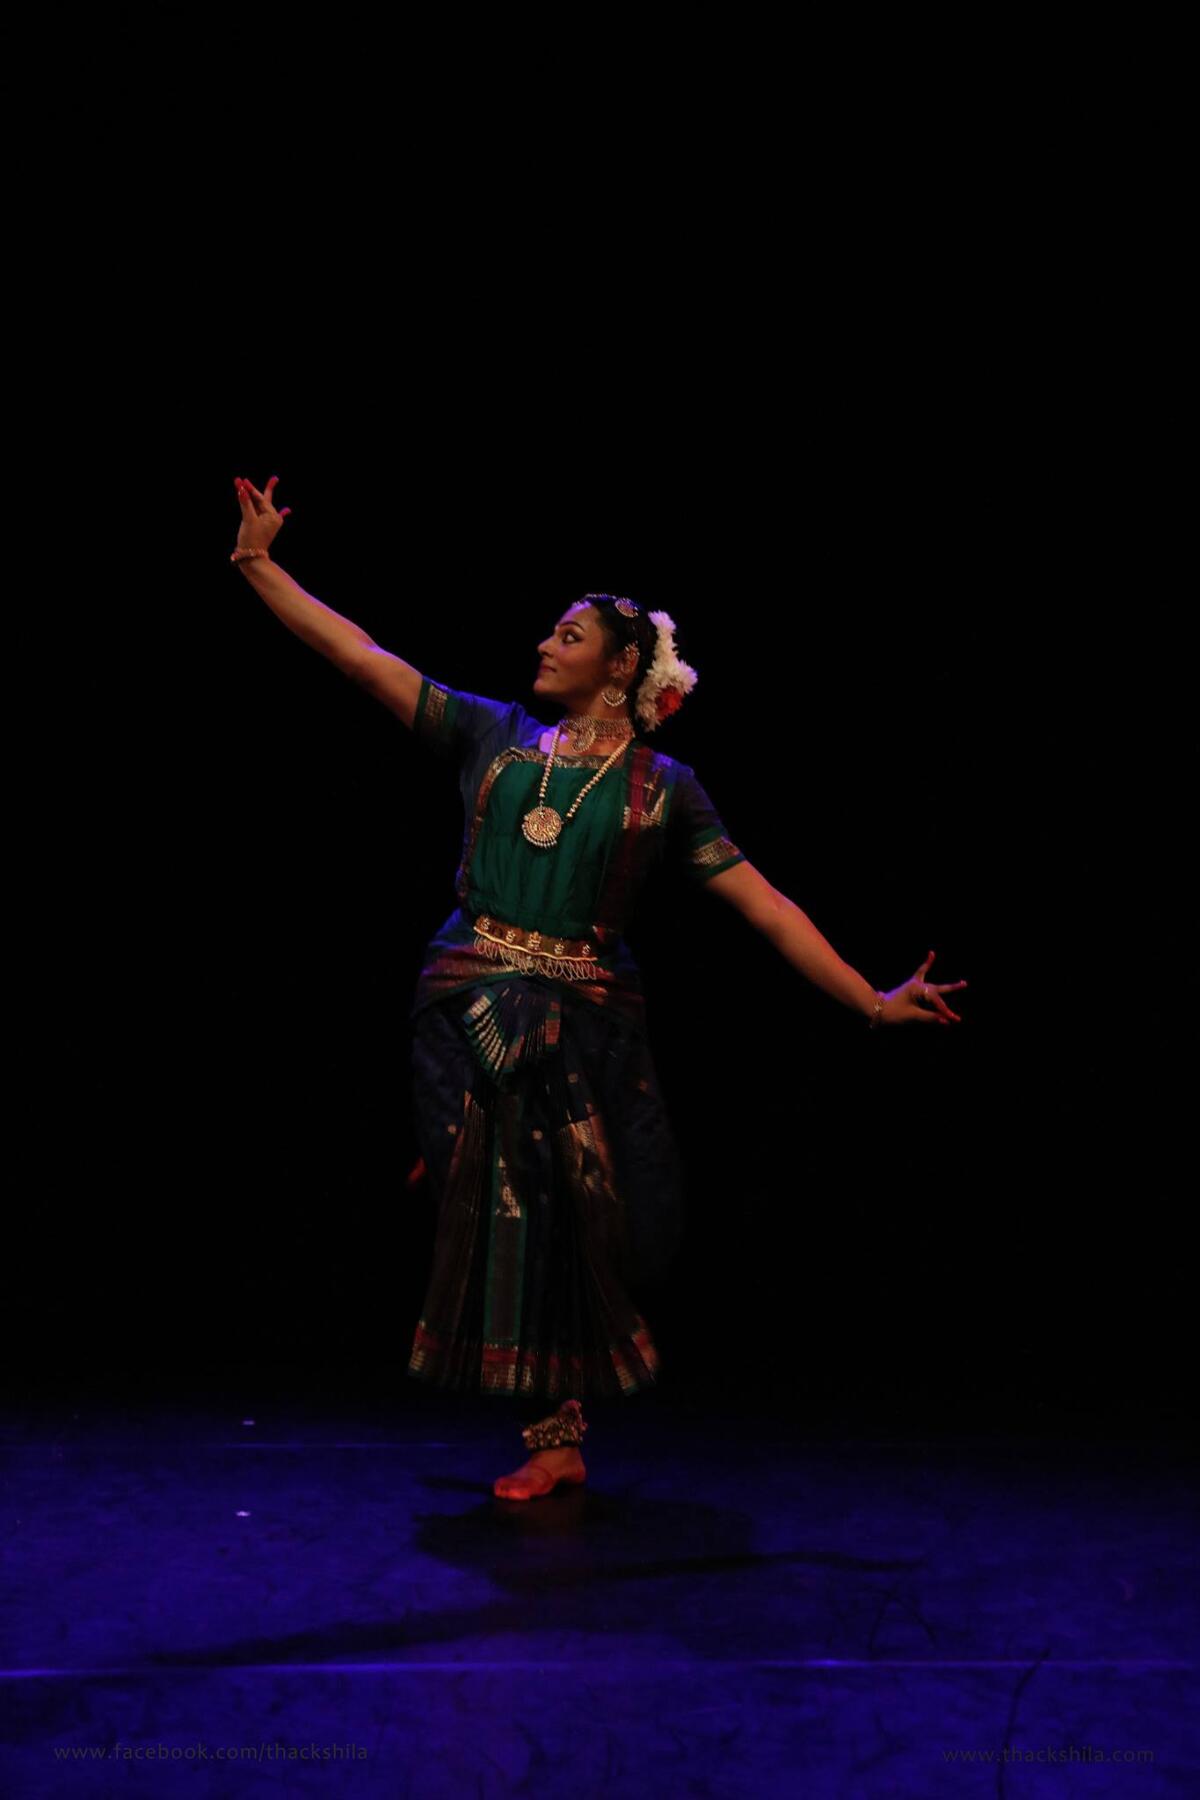 Dancer on a stage